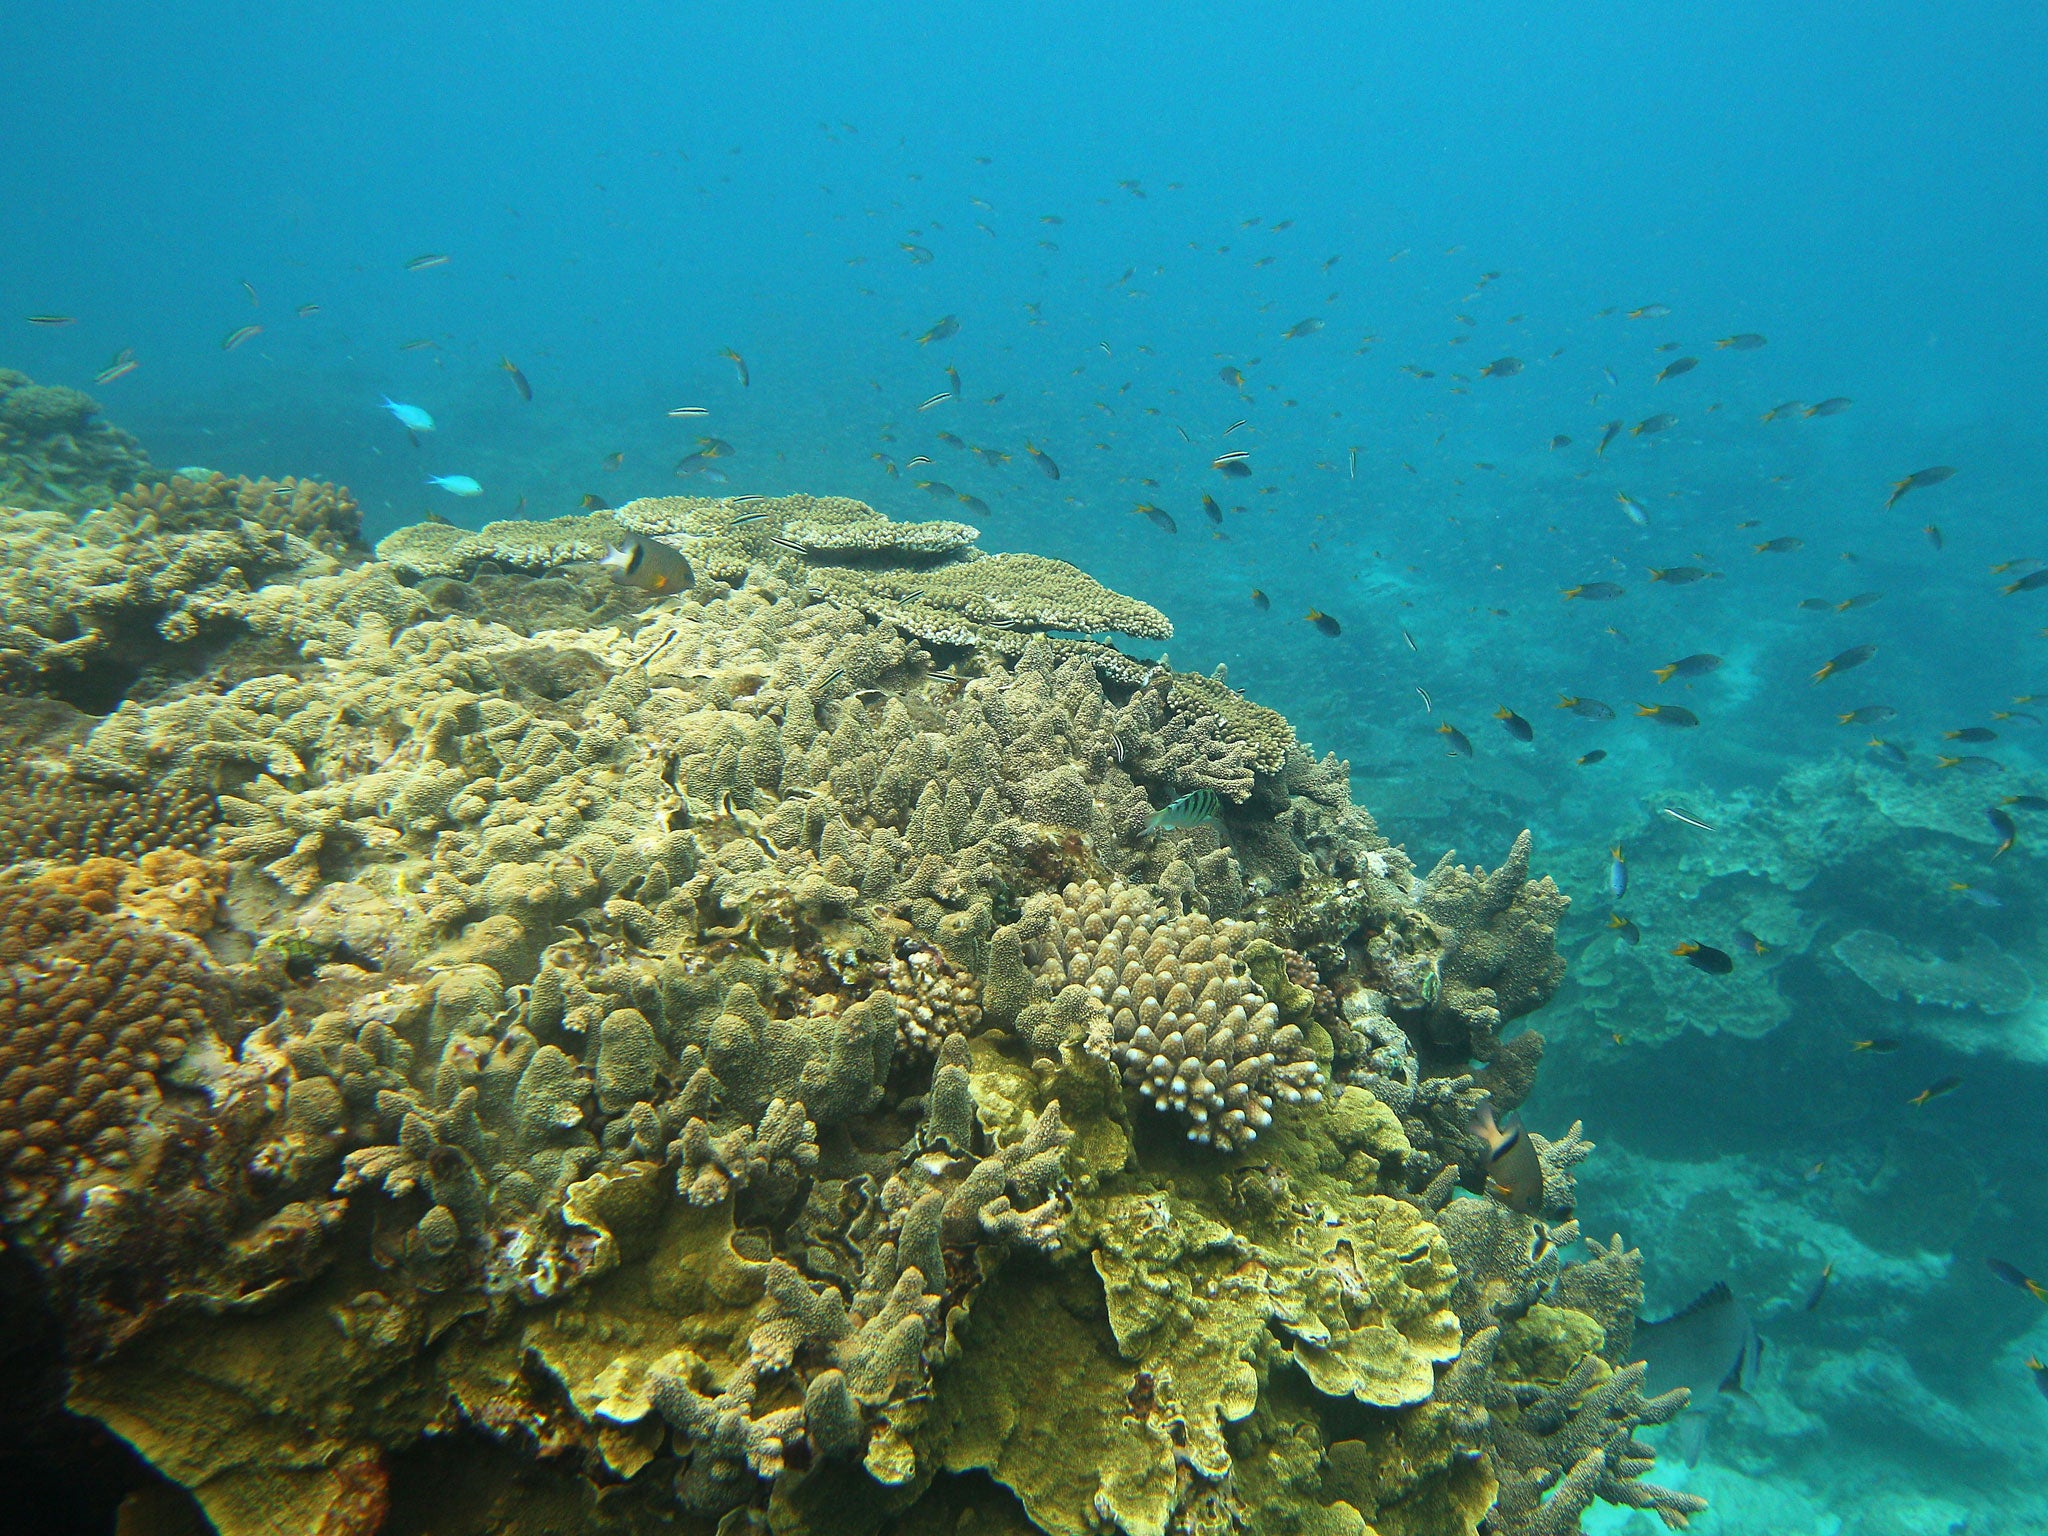 Fish are seen swimming around coral formations on the southern-most coral cay of the Great Barrier Reef.